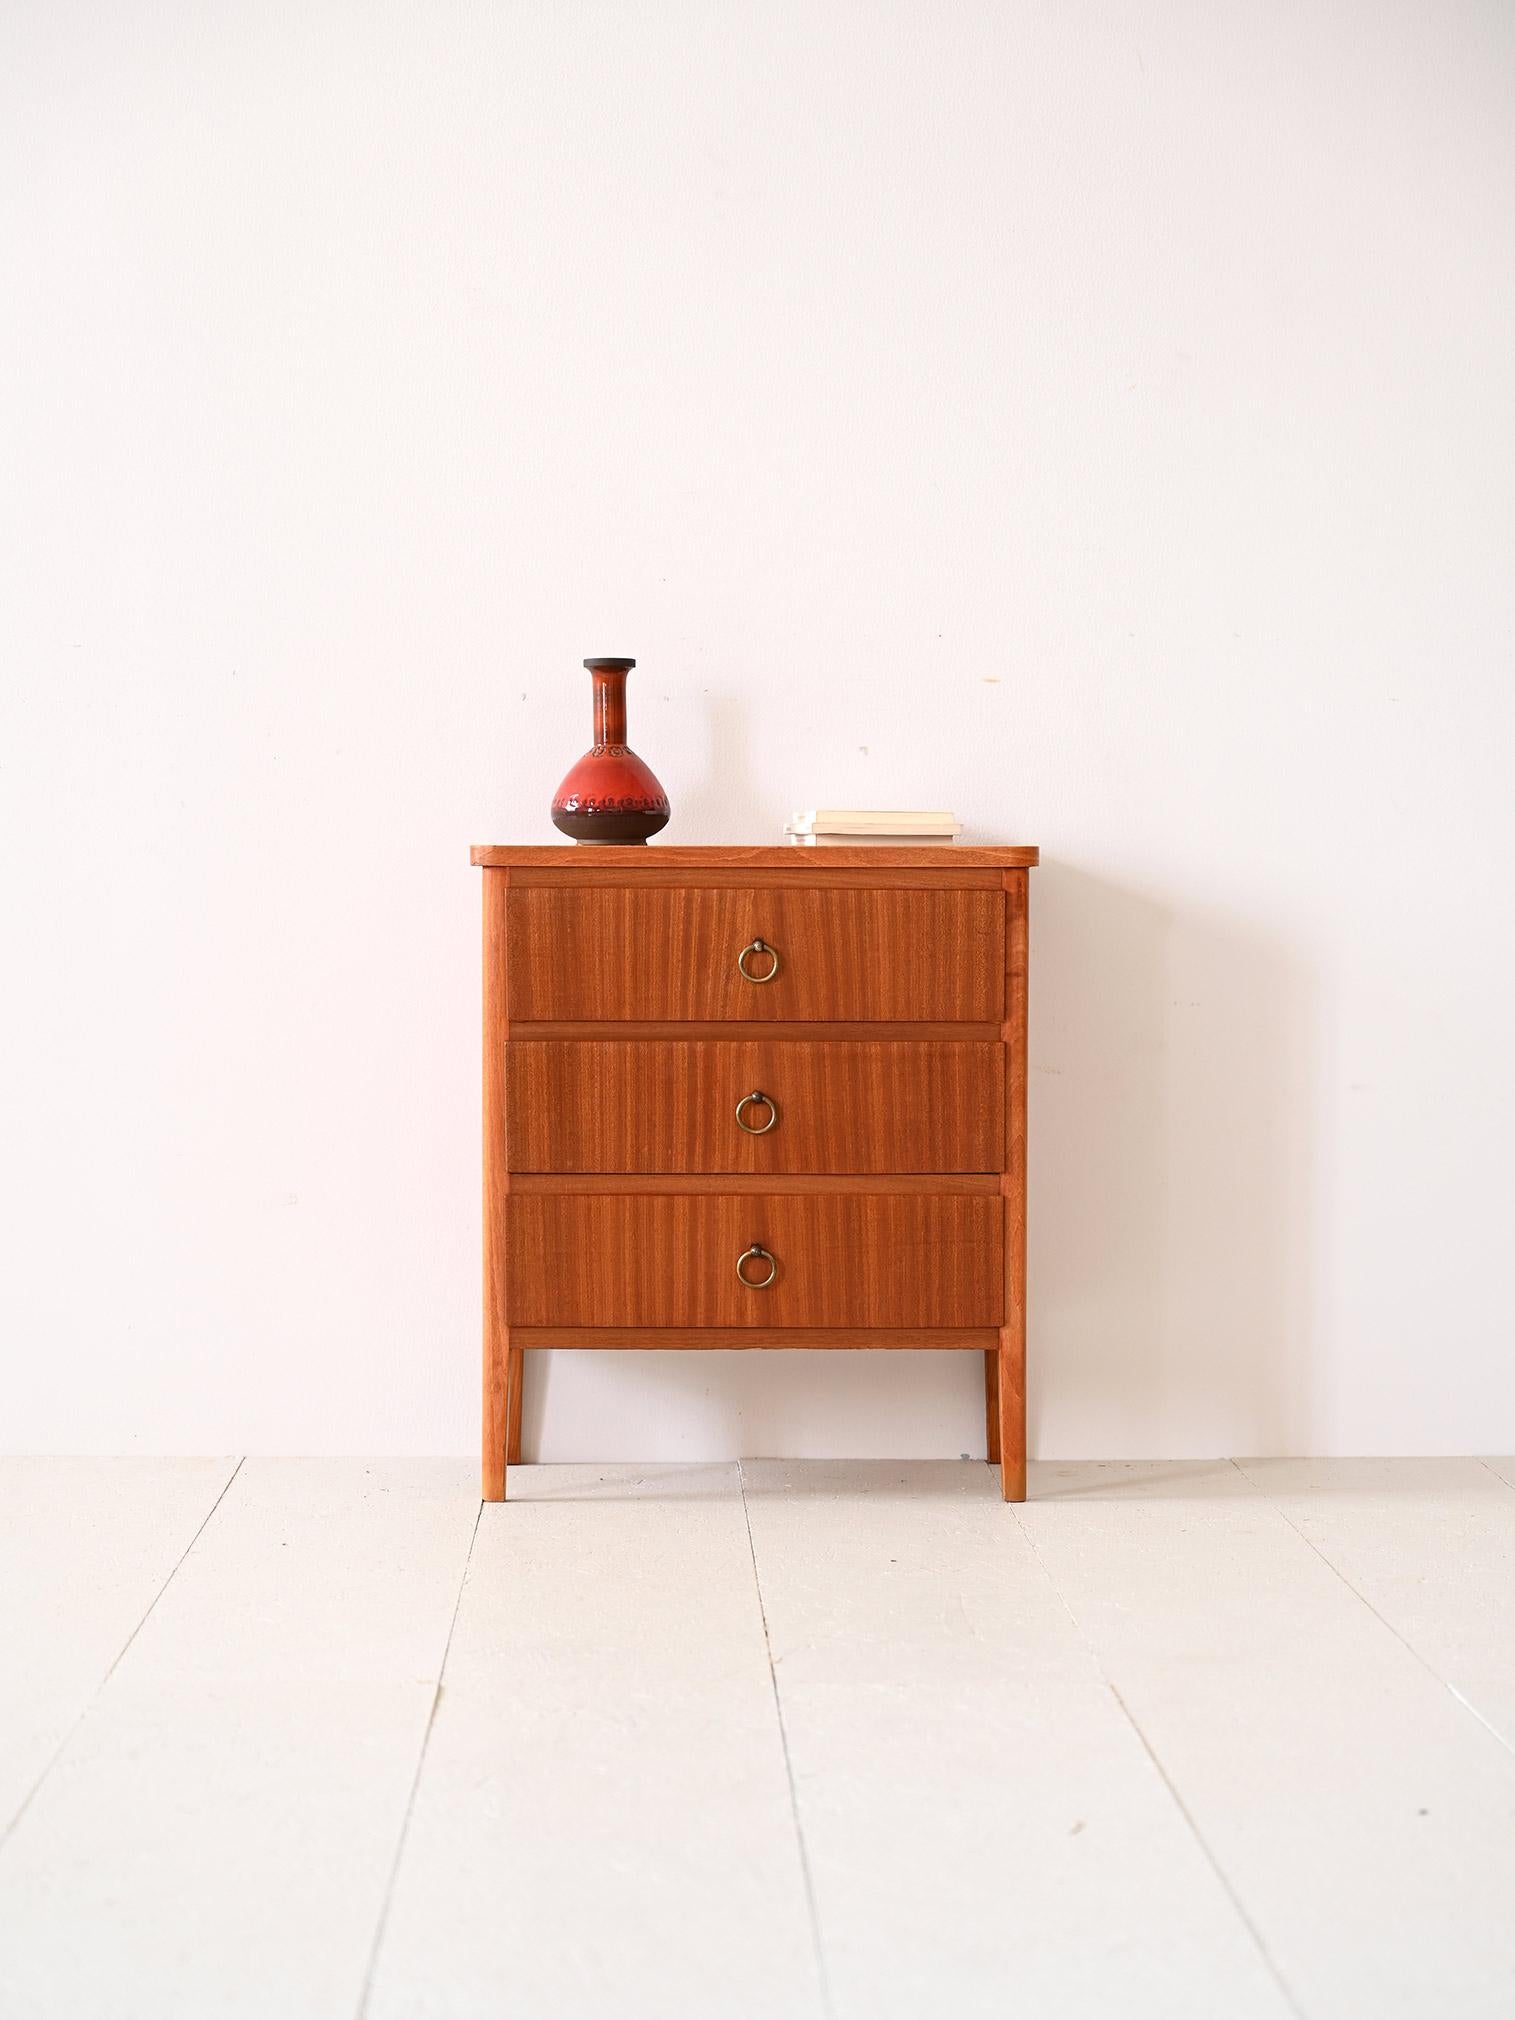 Vintage cabinet with three drawers.

This small chest of drawers is ideal as a piece of furniture for the entryway, bathroom or as a bedside table for the bedroom. 
Featuring a mahogany frame that thanks to the wood grain and the golden handle of